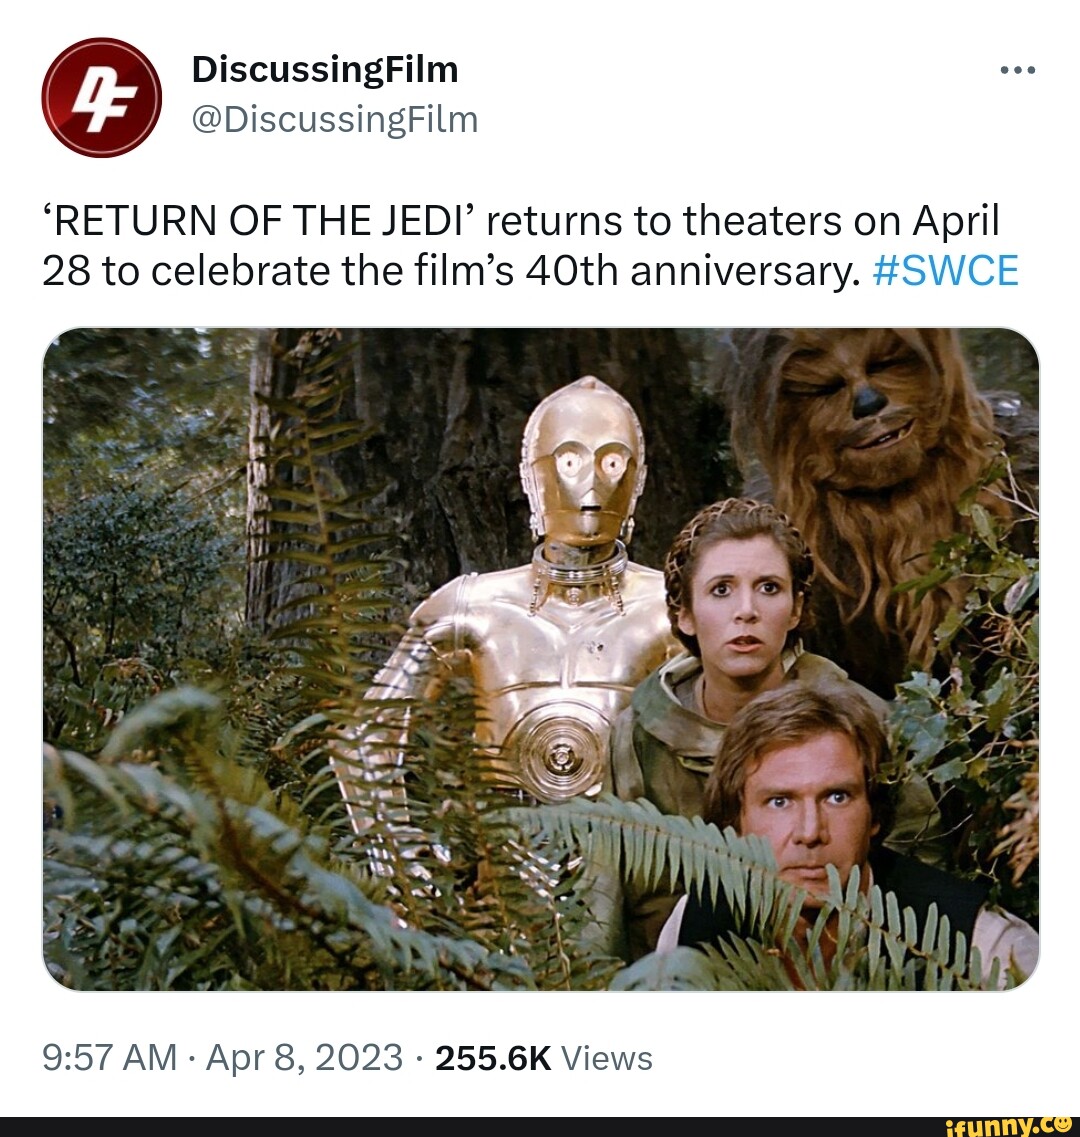 "RETURN OF THE JEDI' returns to theaters on April 28 to celebrate the